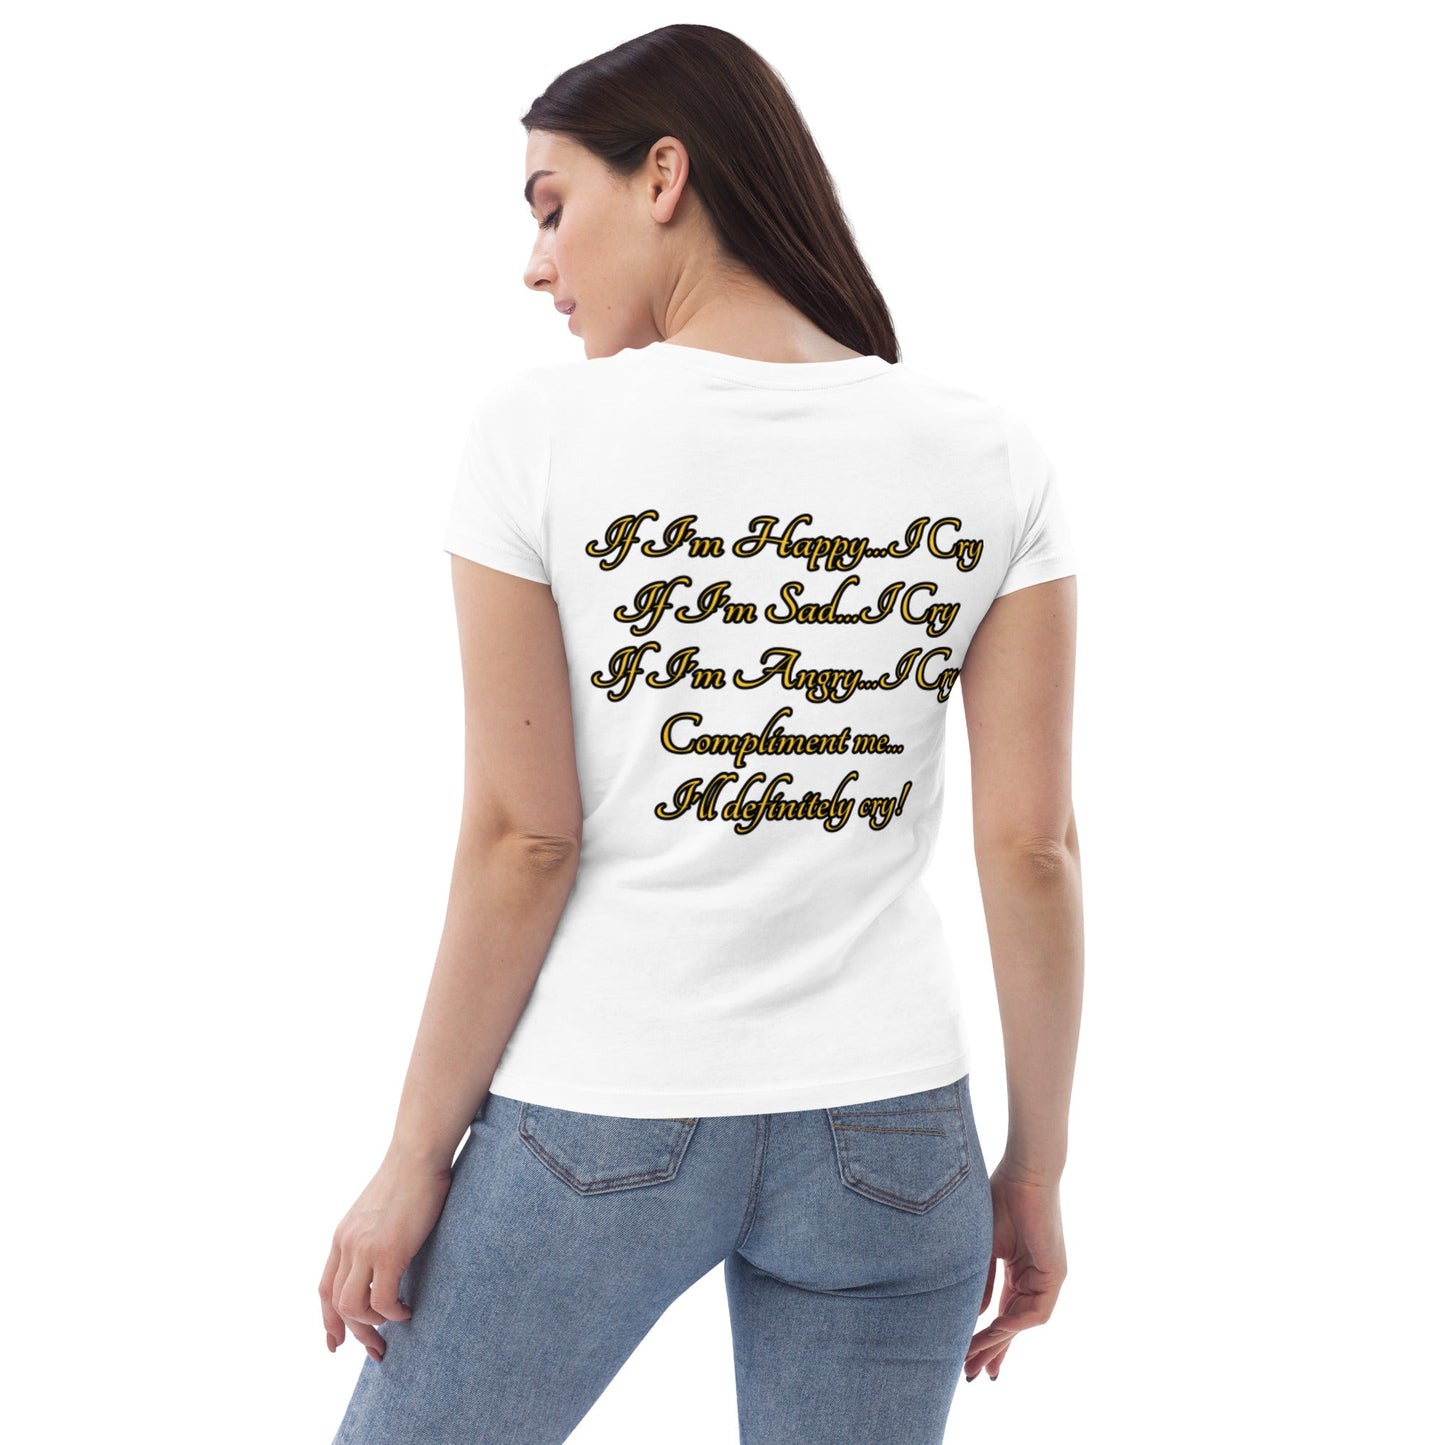 I cry Women's fitted eco tee - Weirdly Sensational